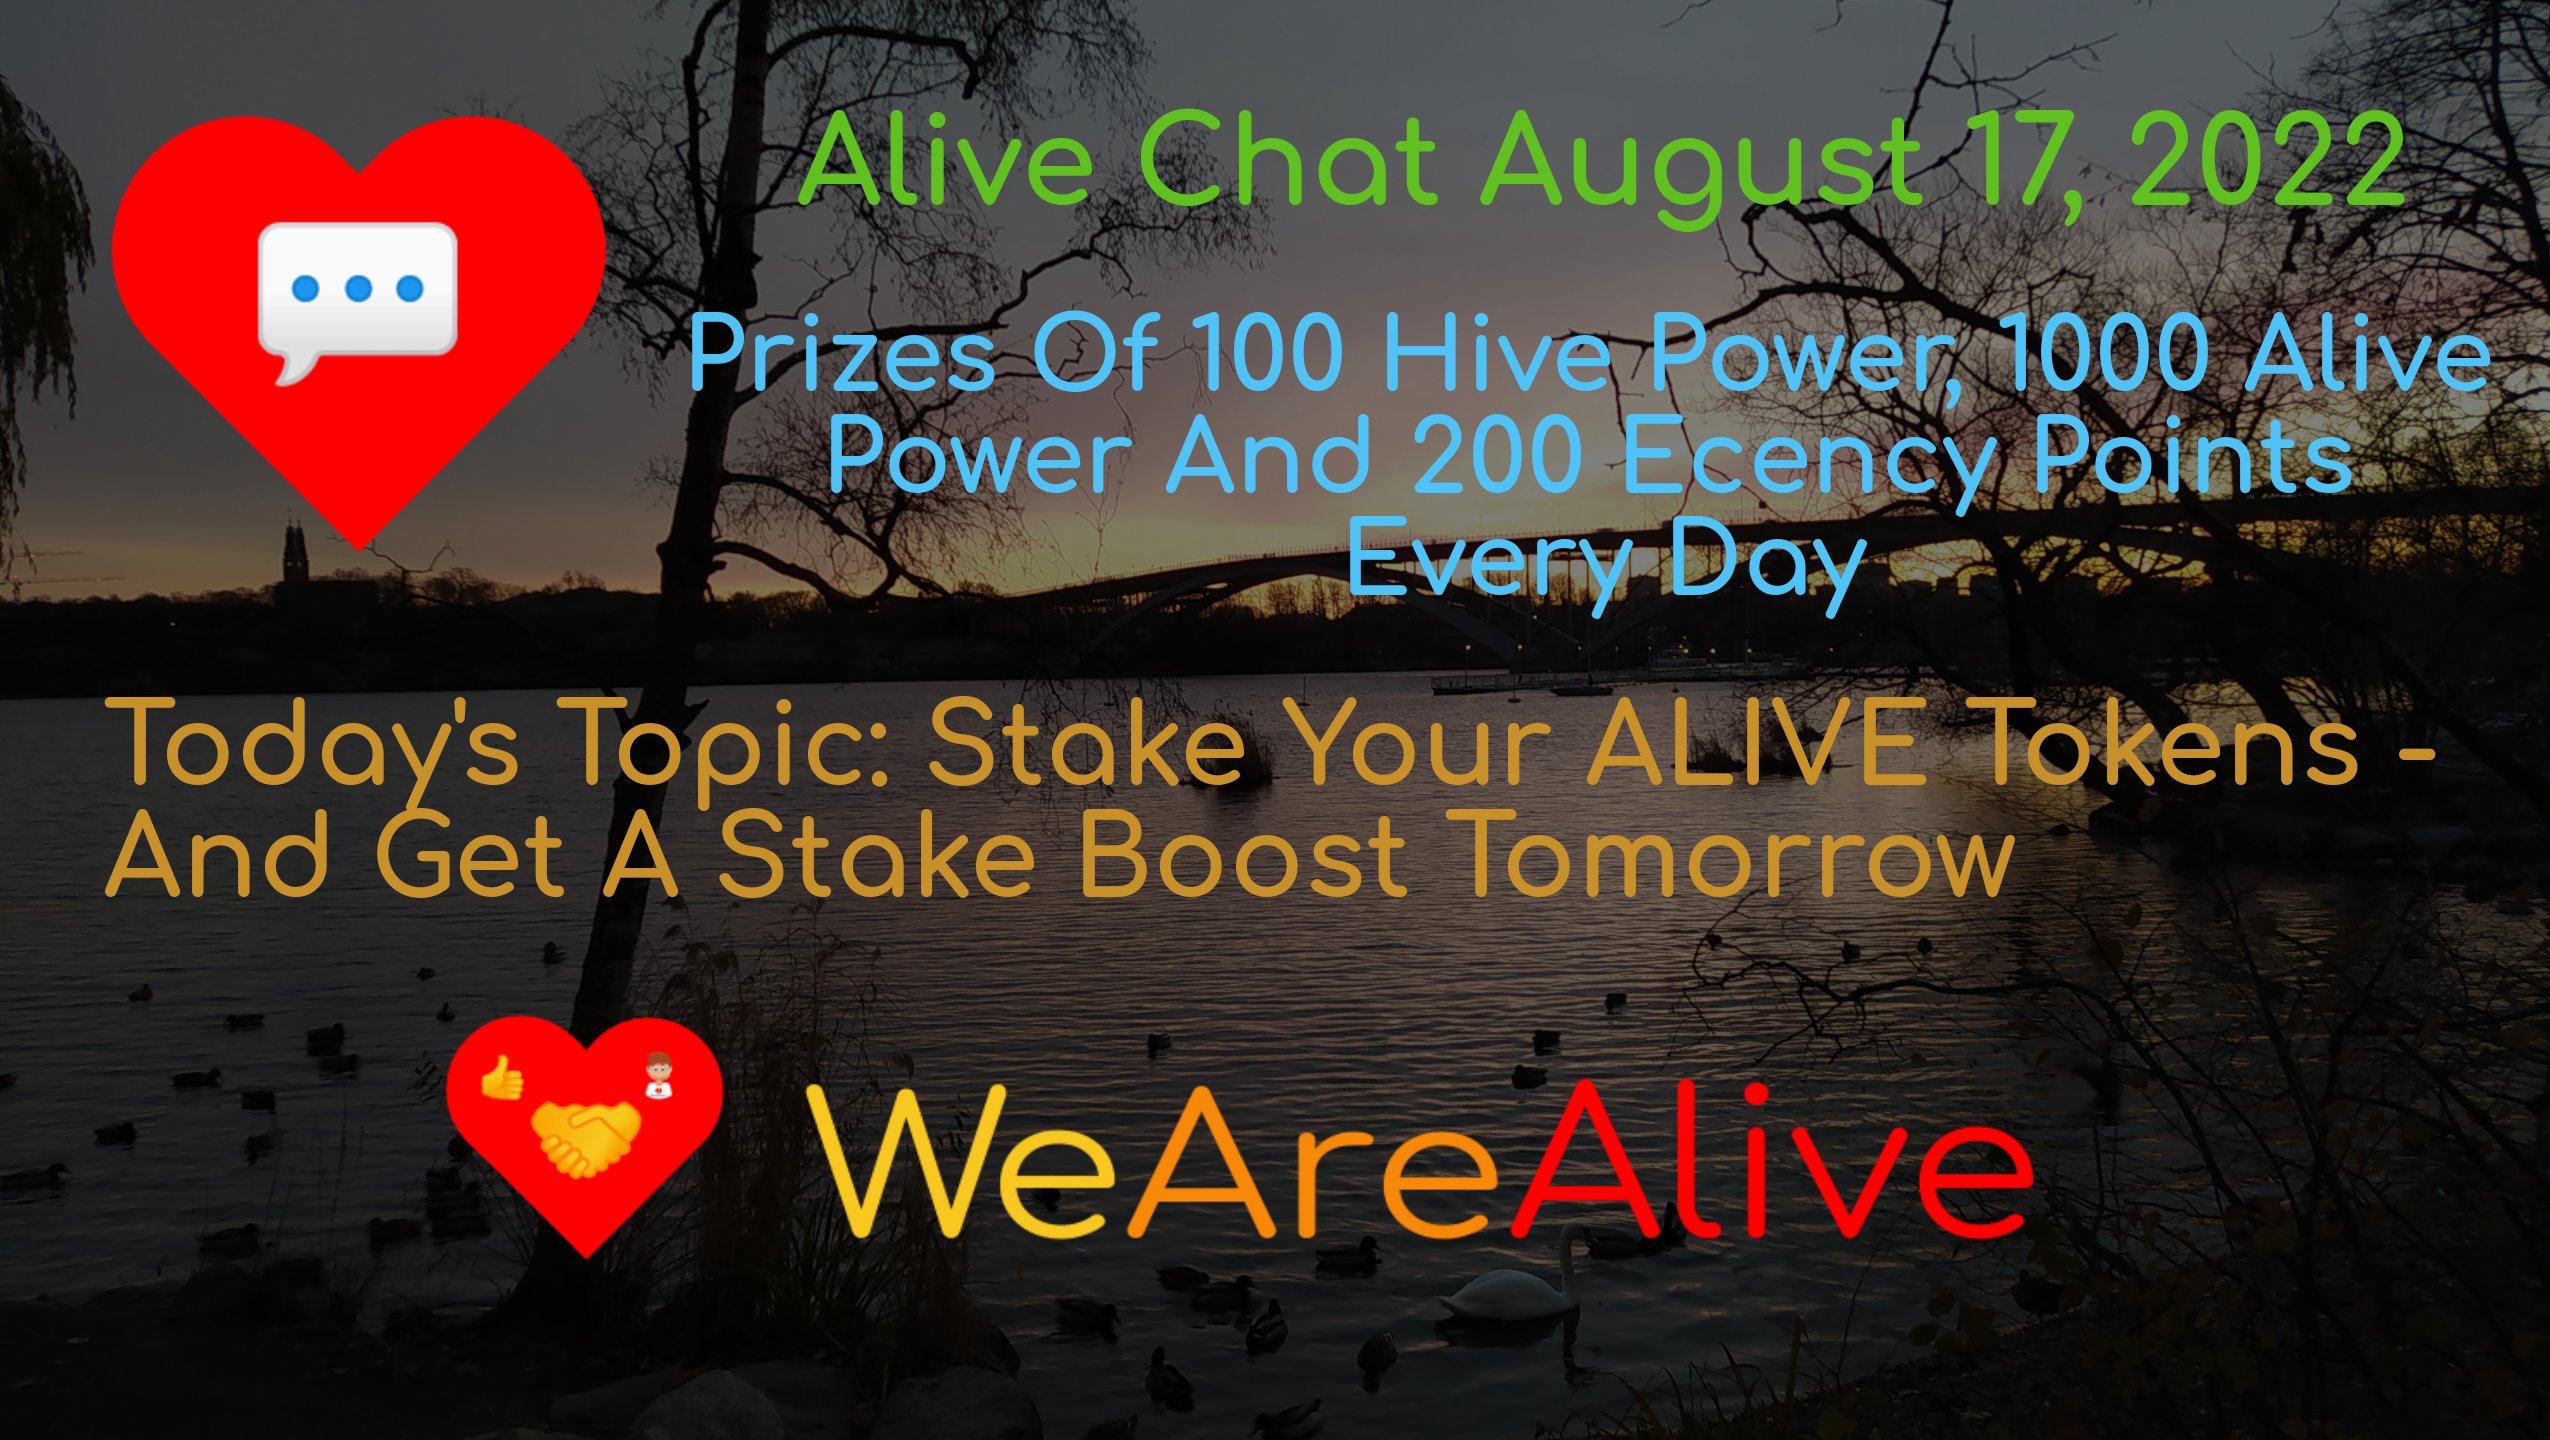 @alive.chat/alive-chat-august-17-2022-daily-prize-drawing-open-for-entries-todays-topic-stake-your-alive-tokens-and-get-a-stake-boost-tomo